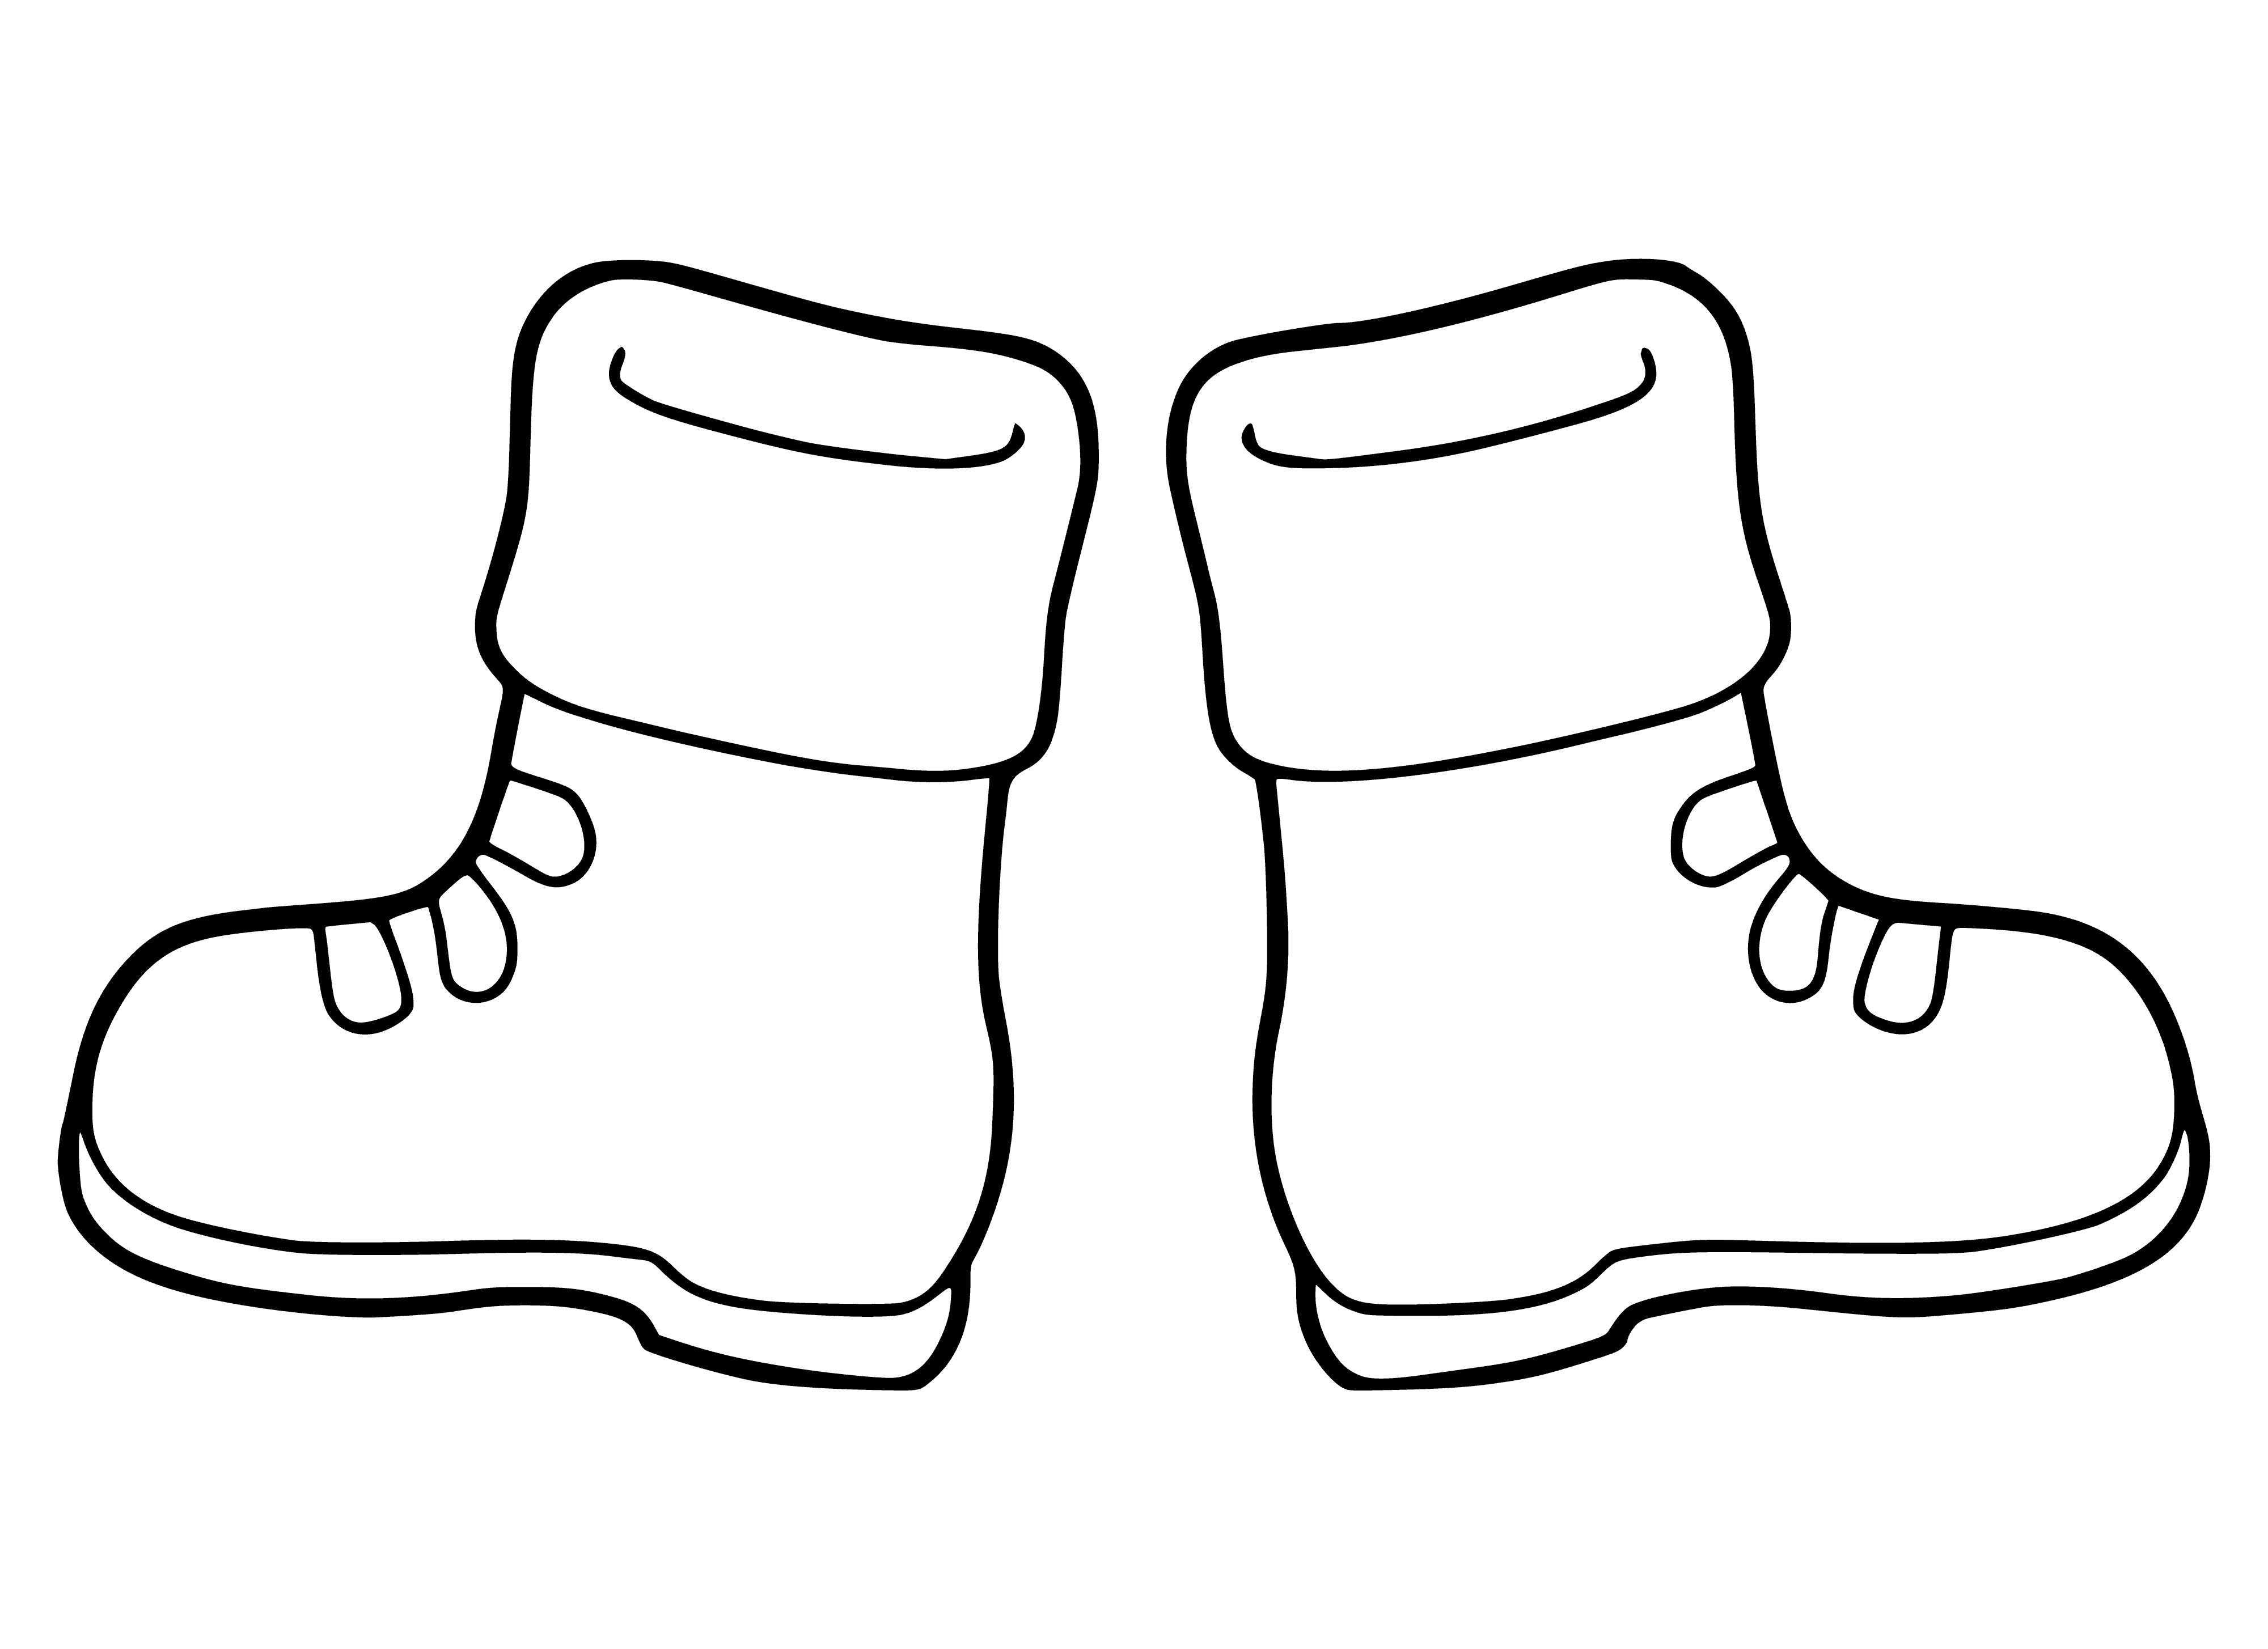 Boots coloring page